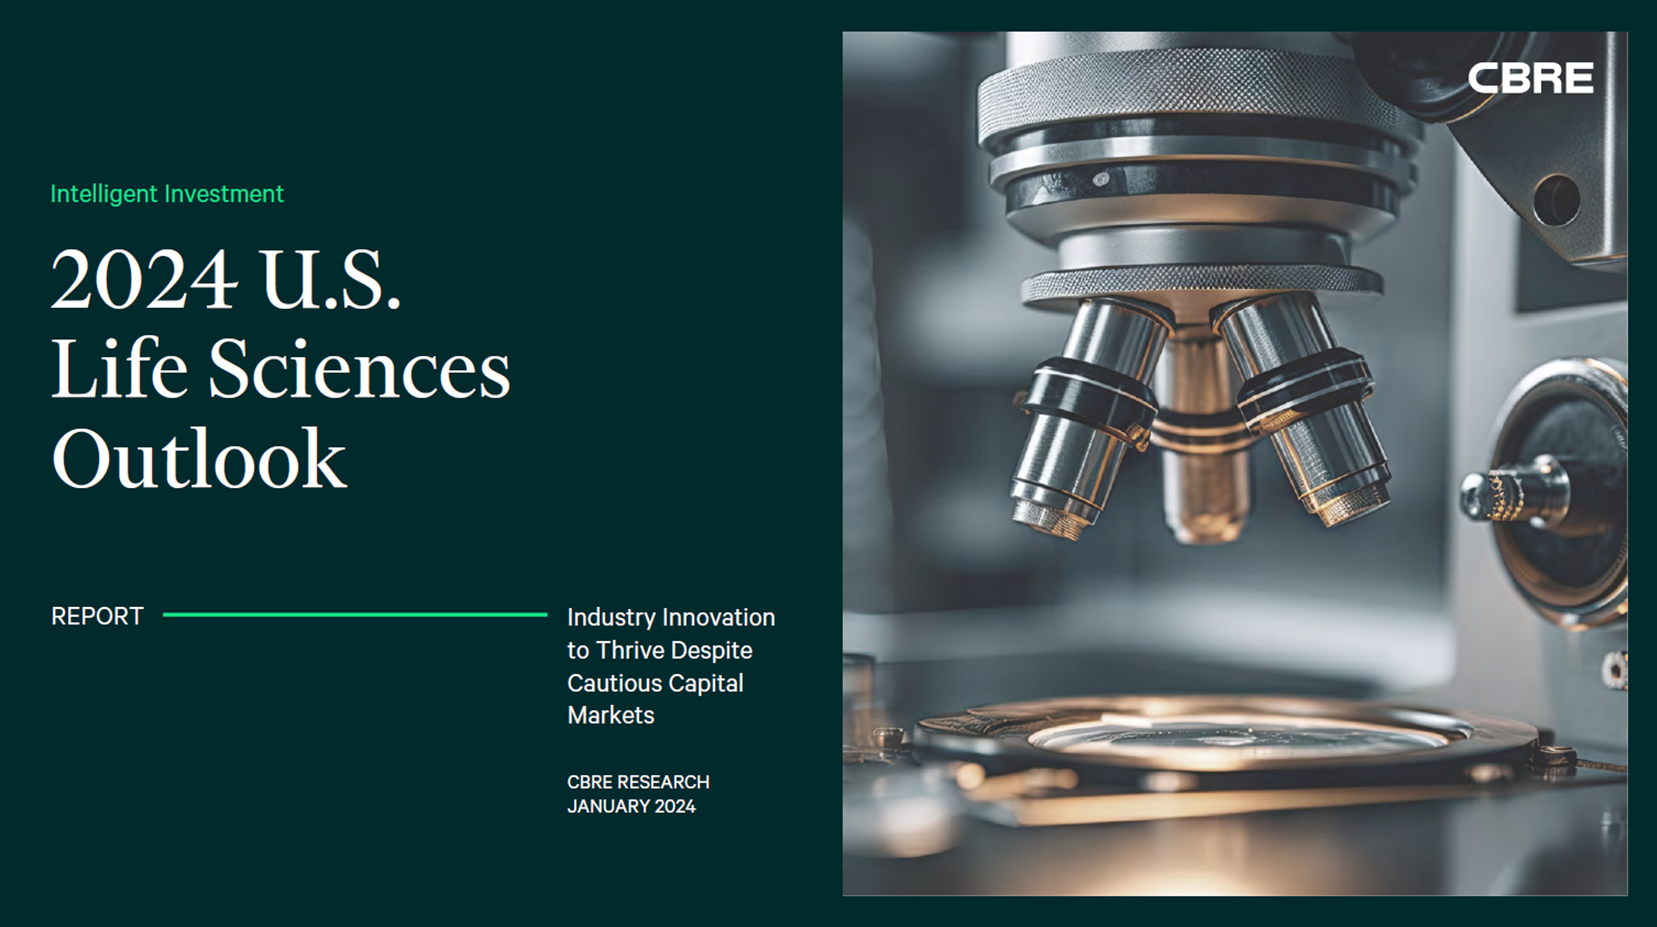 News Release CBRE 2024 US Life Sciences Outlook Wave of Lab